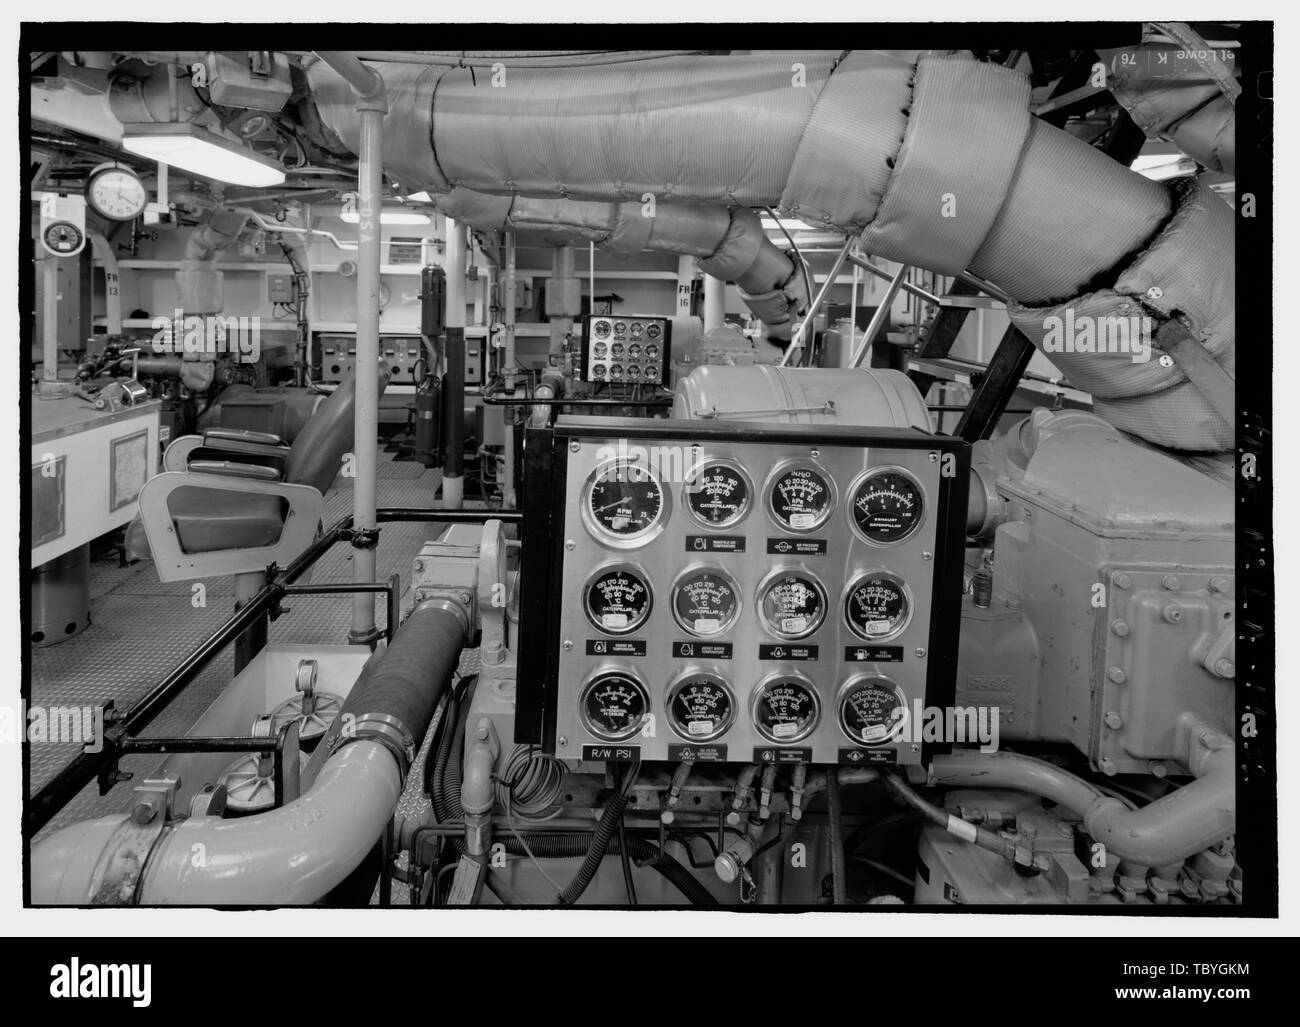 Main engine instrument panel, looking from port.  U.S. Coast Guard Cutter WHITE SUMAC, U.S. Coast Guard 8th District Base, 4640 Urquhart Street, New Orleans, Orleans Parish, LA Niagara Shipbuilding Corporation FV COMMODORE PERRY FV ELLIOT FY VKELPIE JOY TOY SUMMIT VENTURE Union Diesel Engine Company Christianson, Justine, transmitter Croteau, Todd, project manager US Coast Guard, sponsor Clifford, Candace, historian Lowe, Jet, photographer Brooks, Pete, delineator Jefferson, Howard, delineator Stock Photo